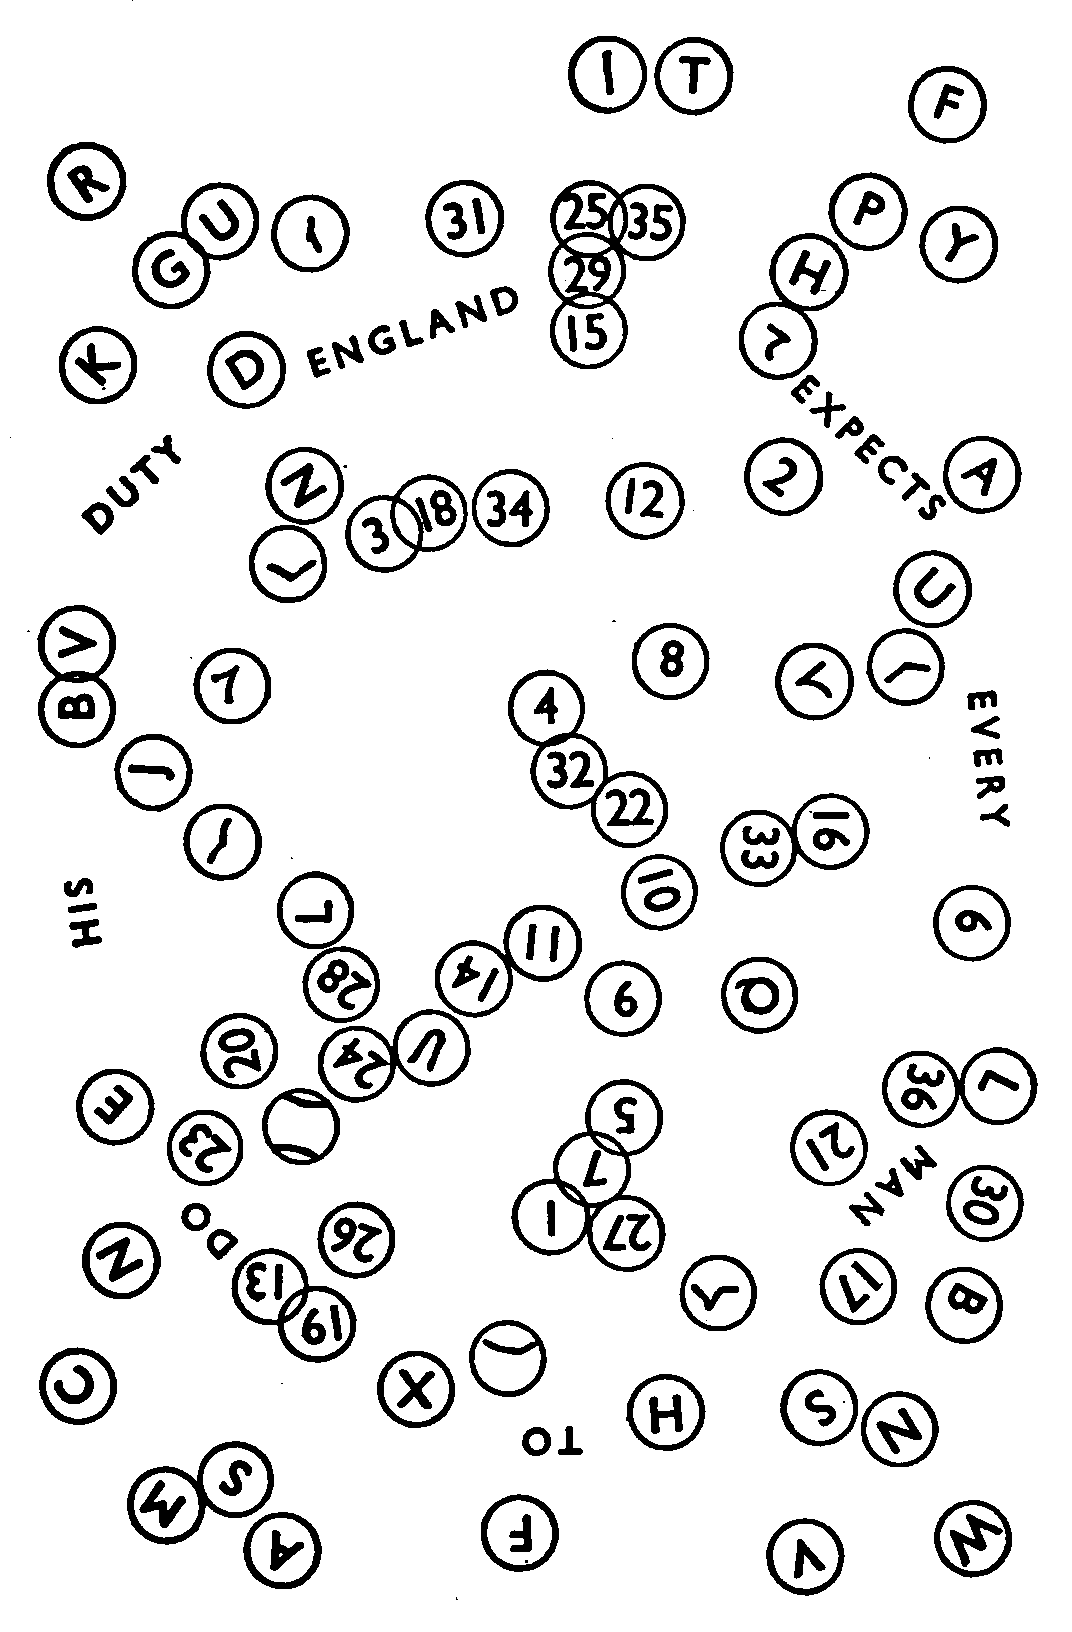 A full-page image of dozens of circles. Their arrangement appears to be random. Most circles contains either a letter or a number, with the numbers ranging from 1 to 36. Eight or nine circles instead contain a short, irregularly-shaped line. Words are placed in between the circles, arranged in a loop through the entire image, reading clockwise “England expects every man to do his duty”.